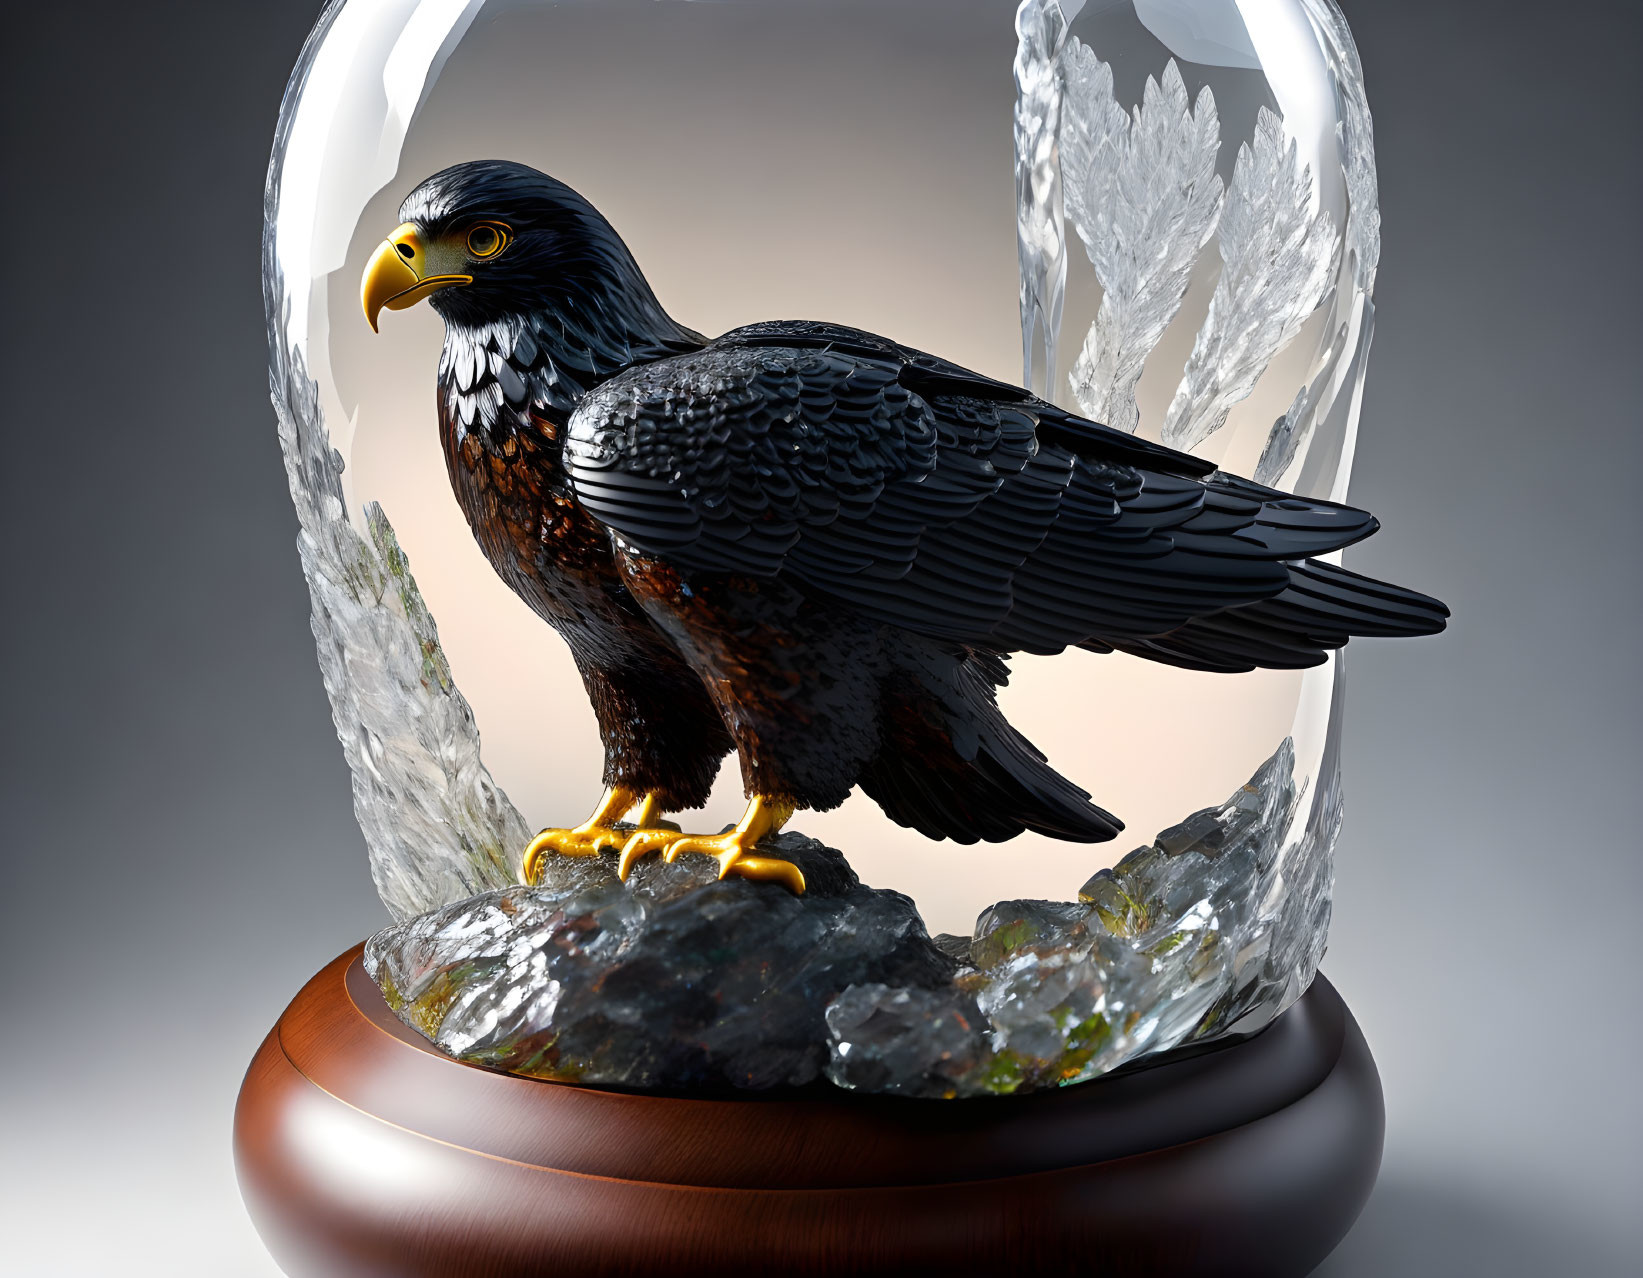 Eagle in a glass 